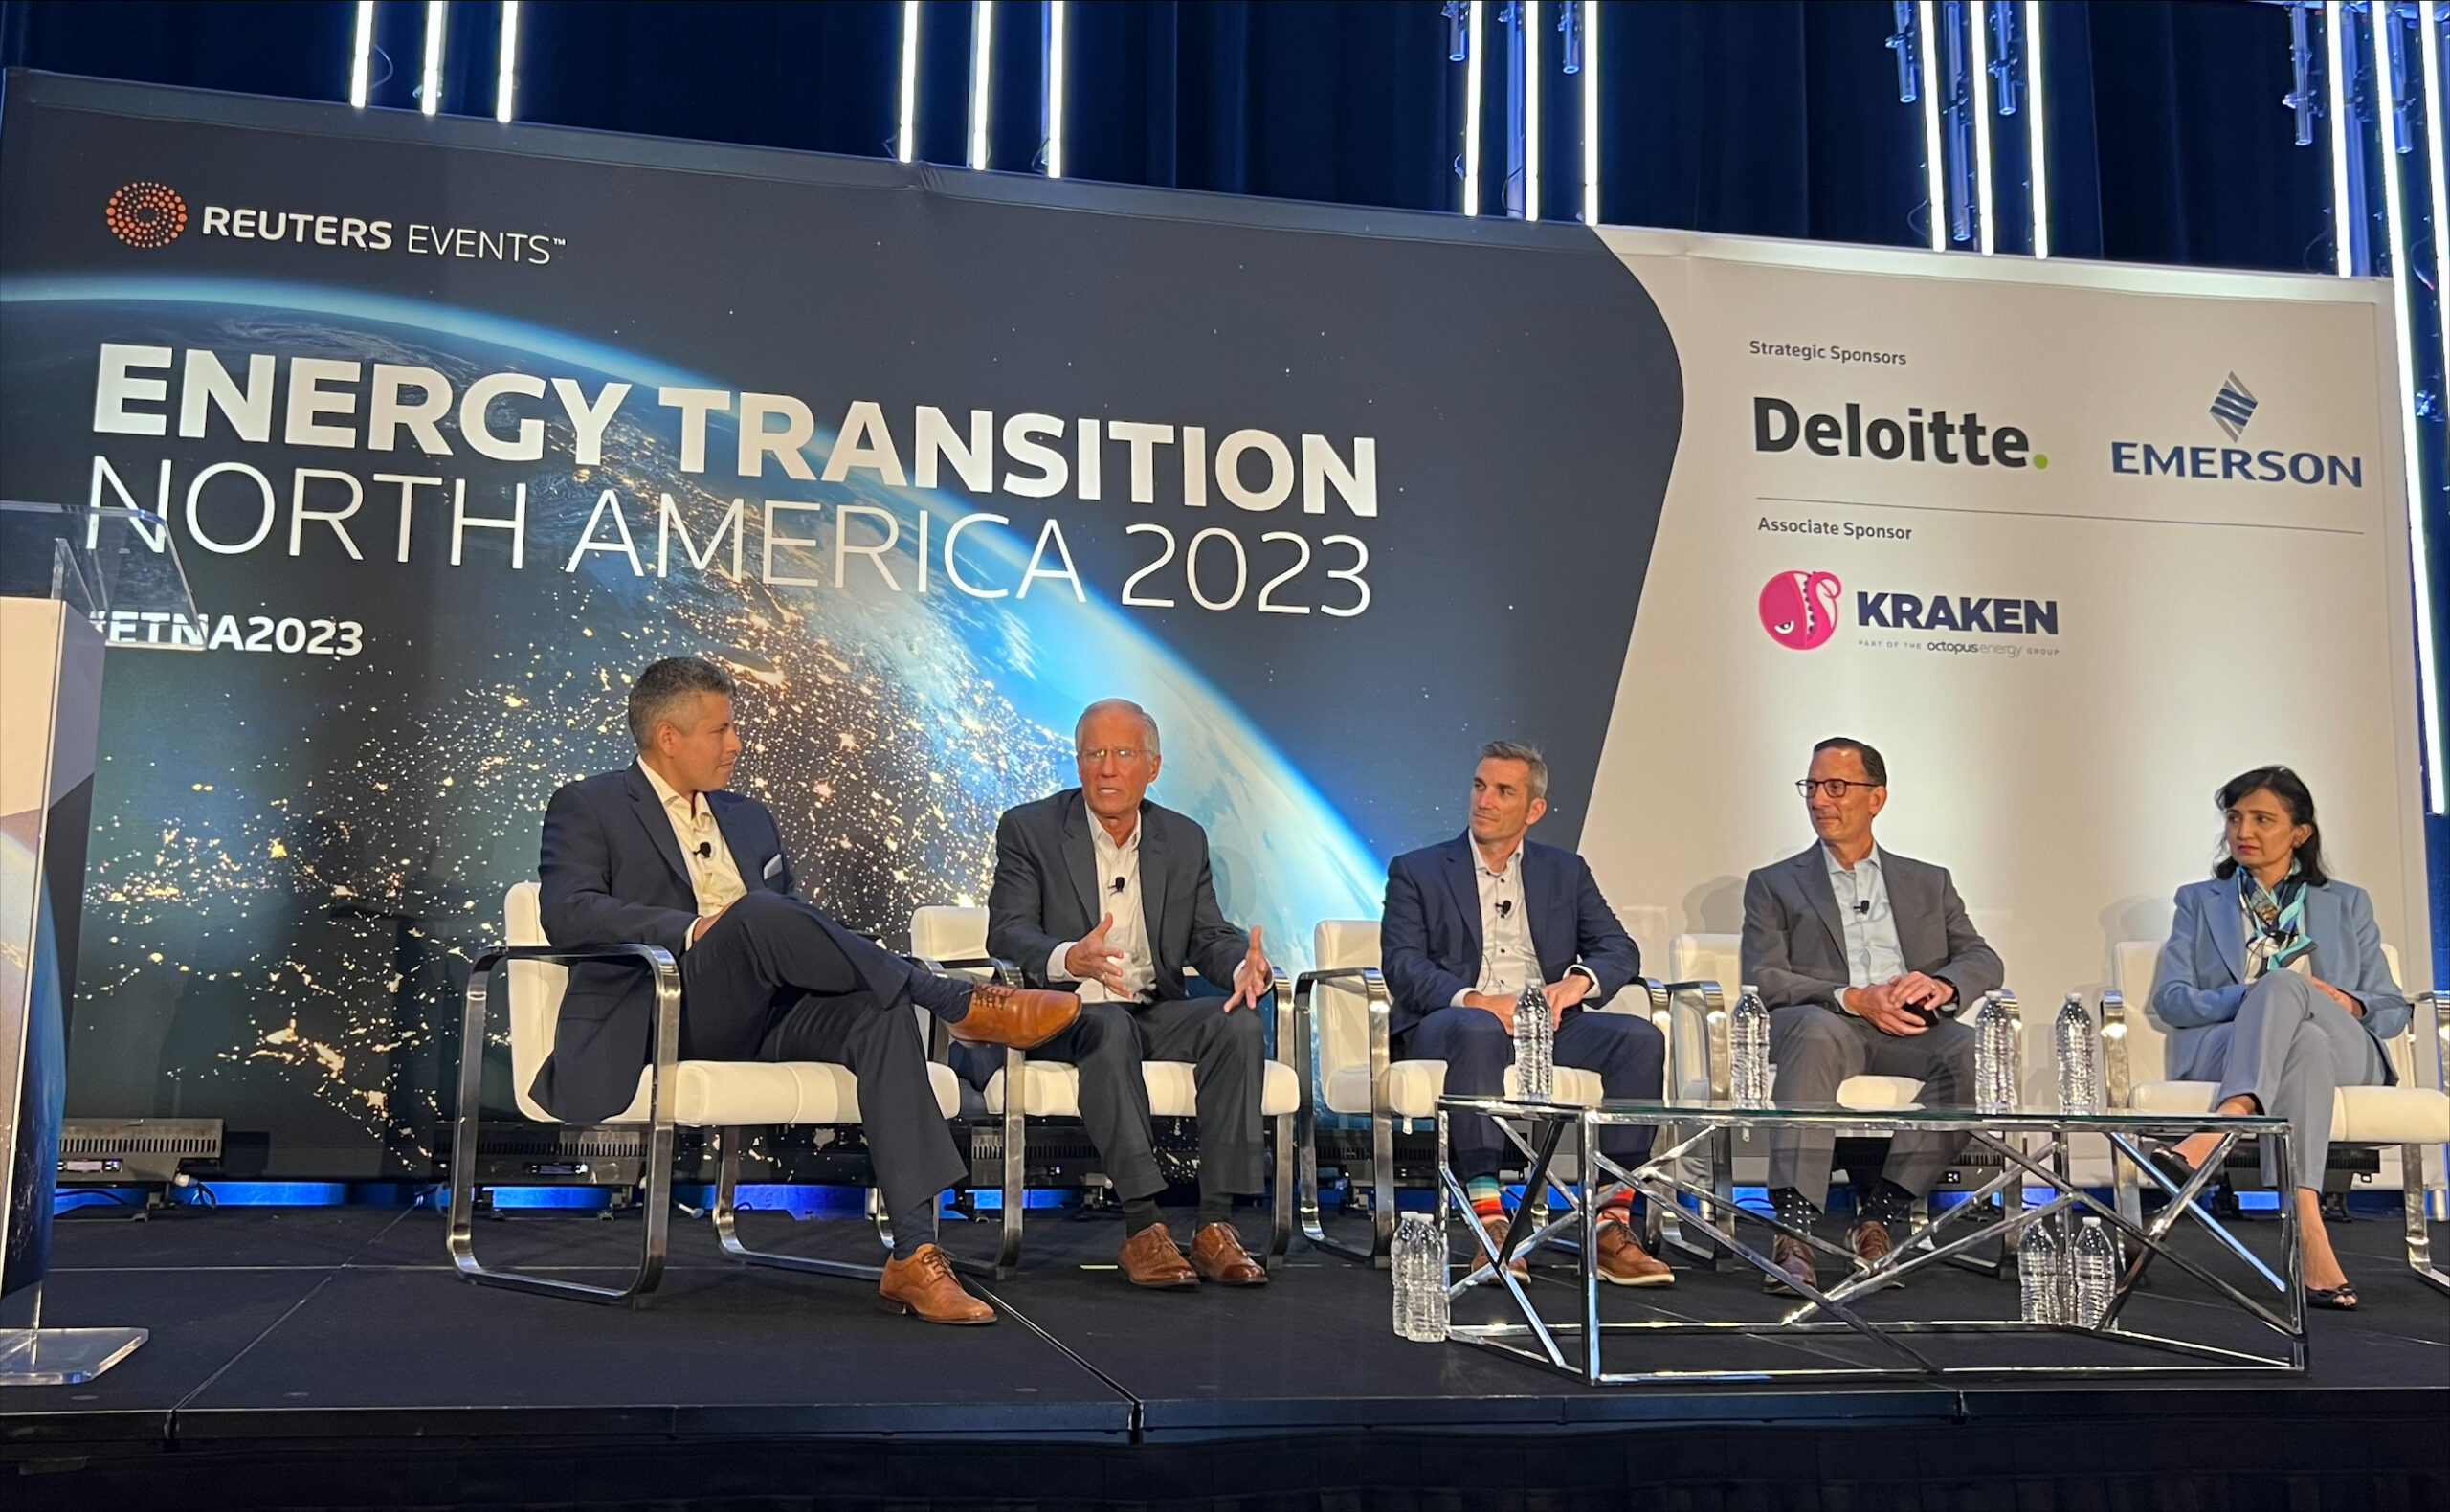 Bob Yeager joins Reuters Energy Transition panel to discuss decarbonization and power generation